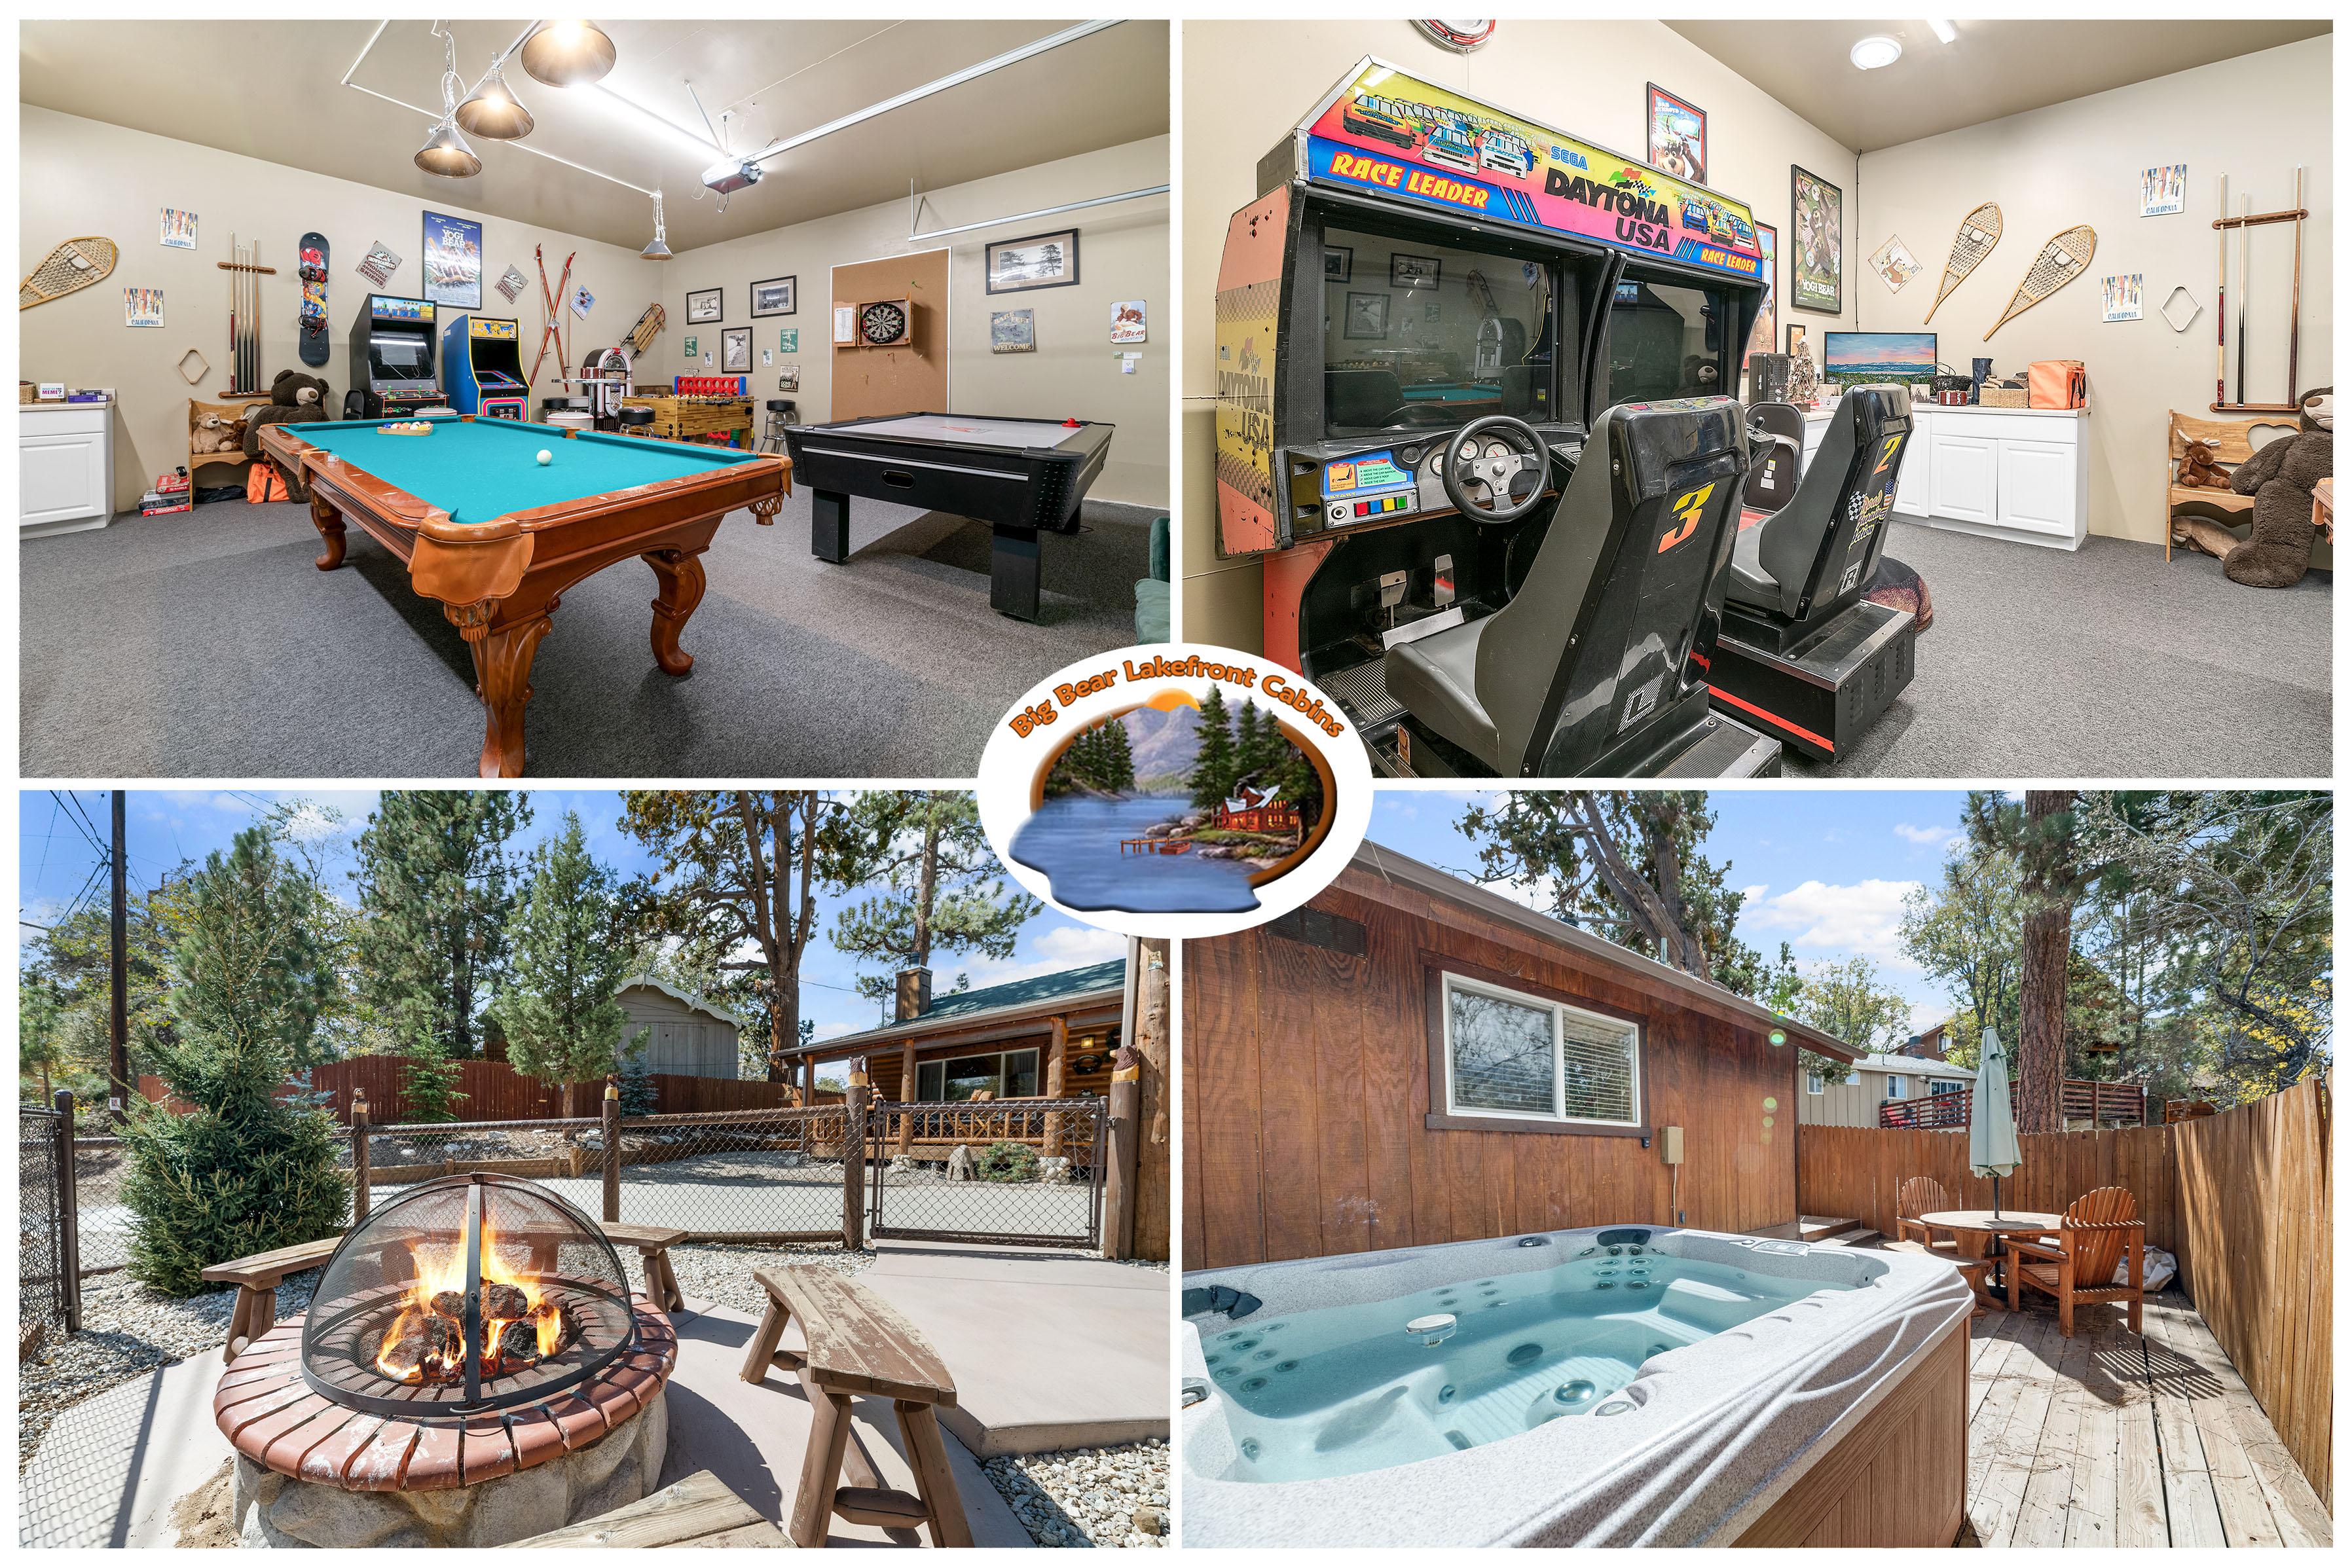 Property Image 1 - YOGI BEARS DEN - Located in upper Moonridge. AWESOME Game Room, Private Hot Tub, gas fire pit, overall an 